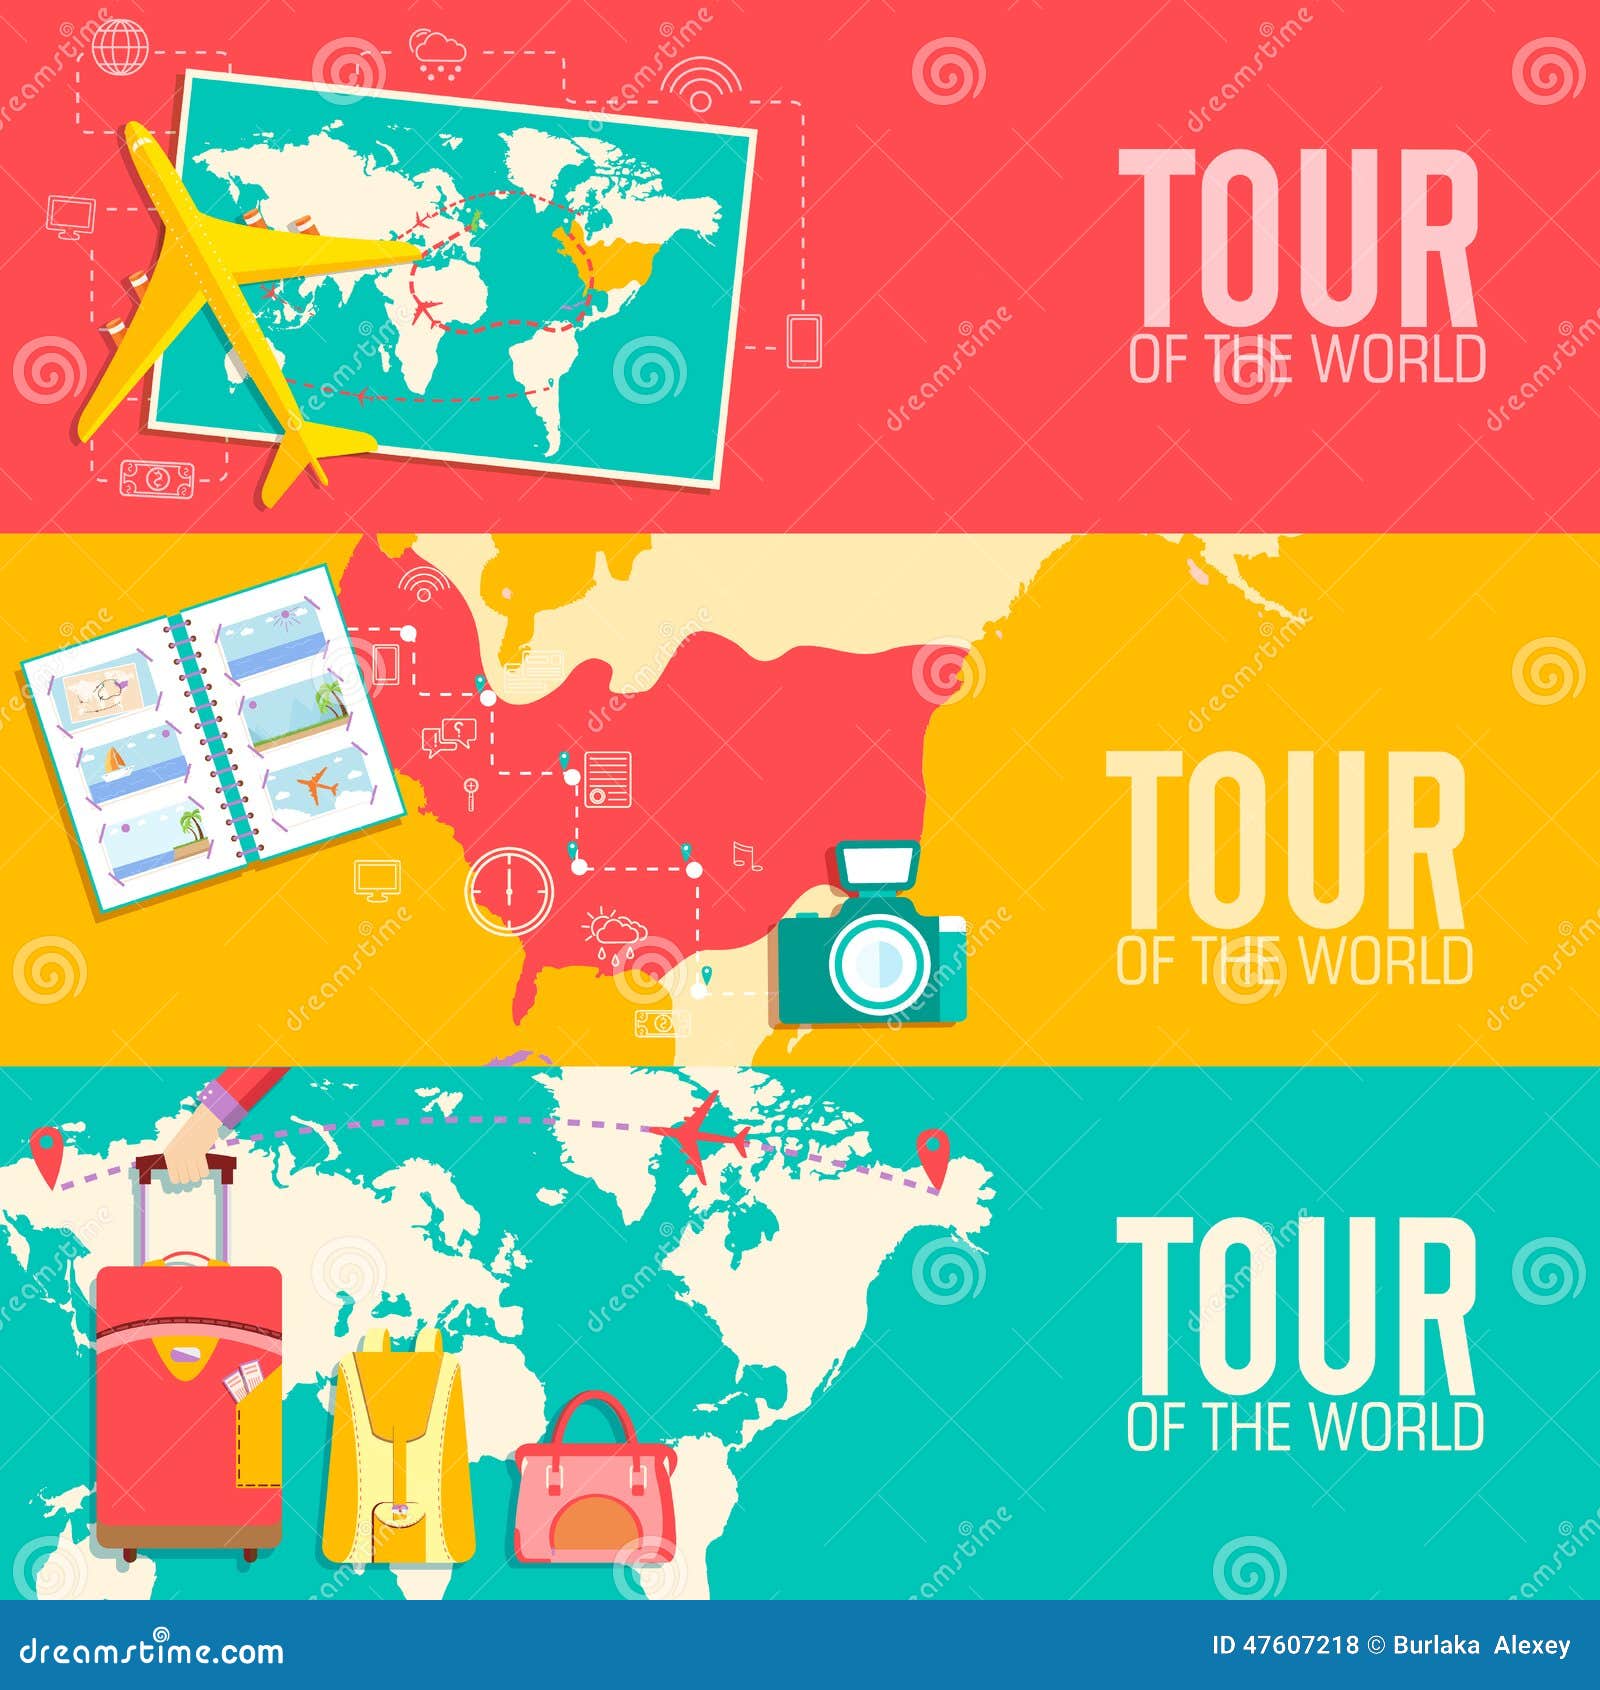 tour of the world poster